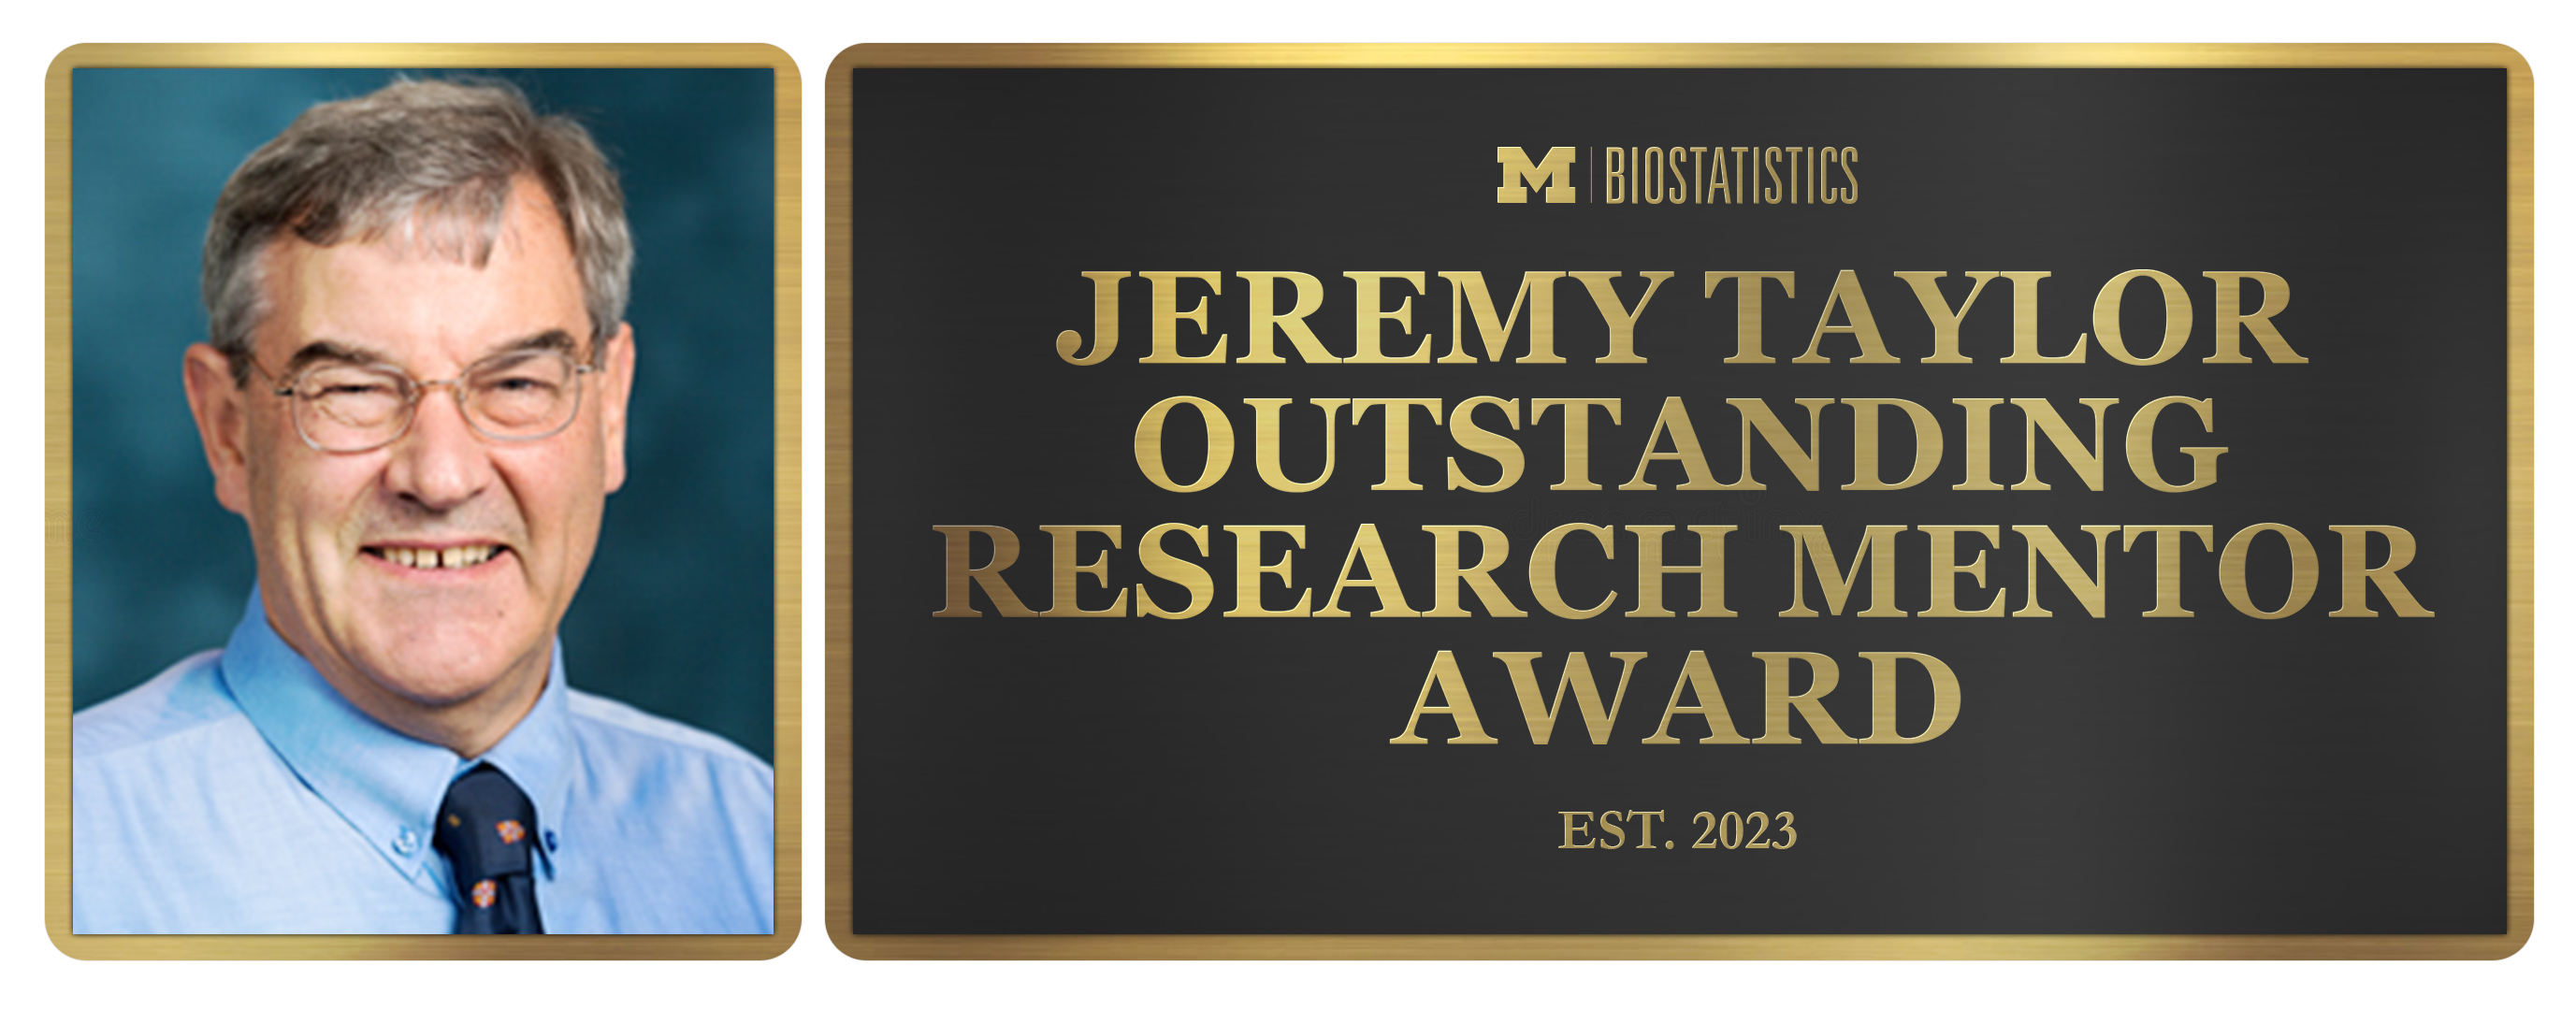 Jeremy Taylor Outstanding Research Mentor